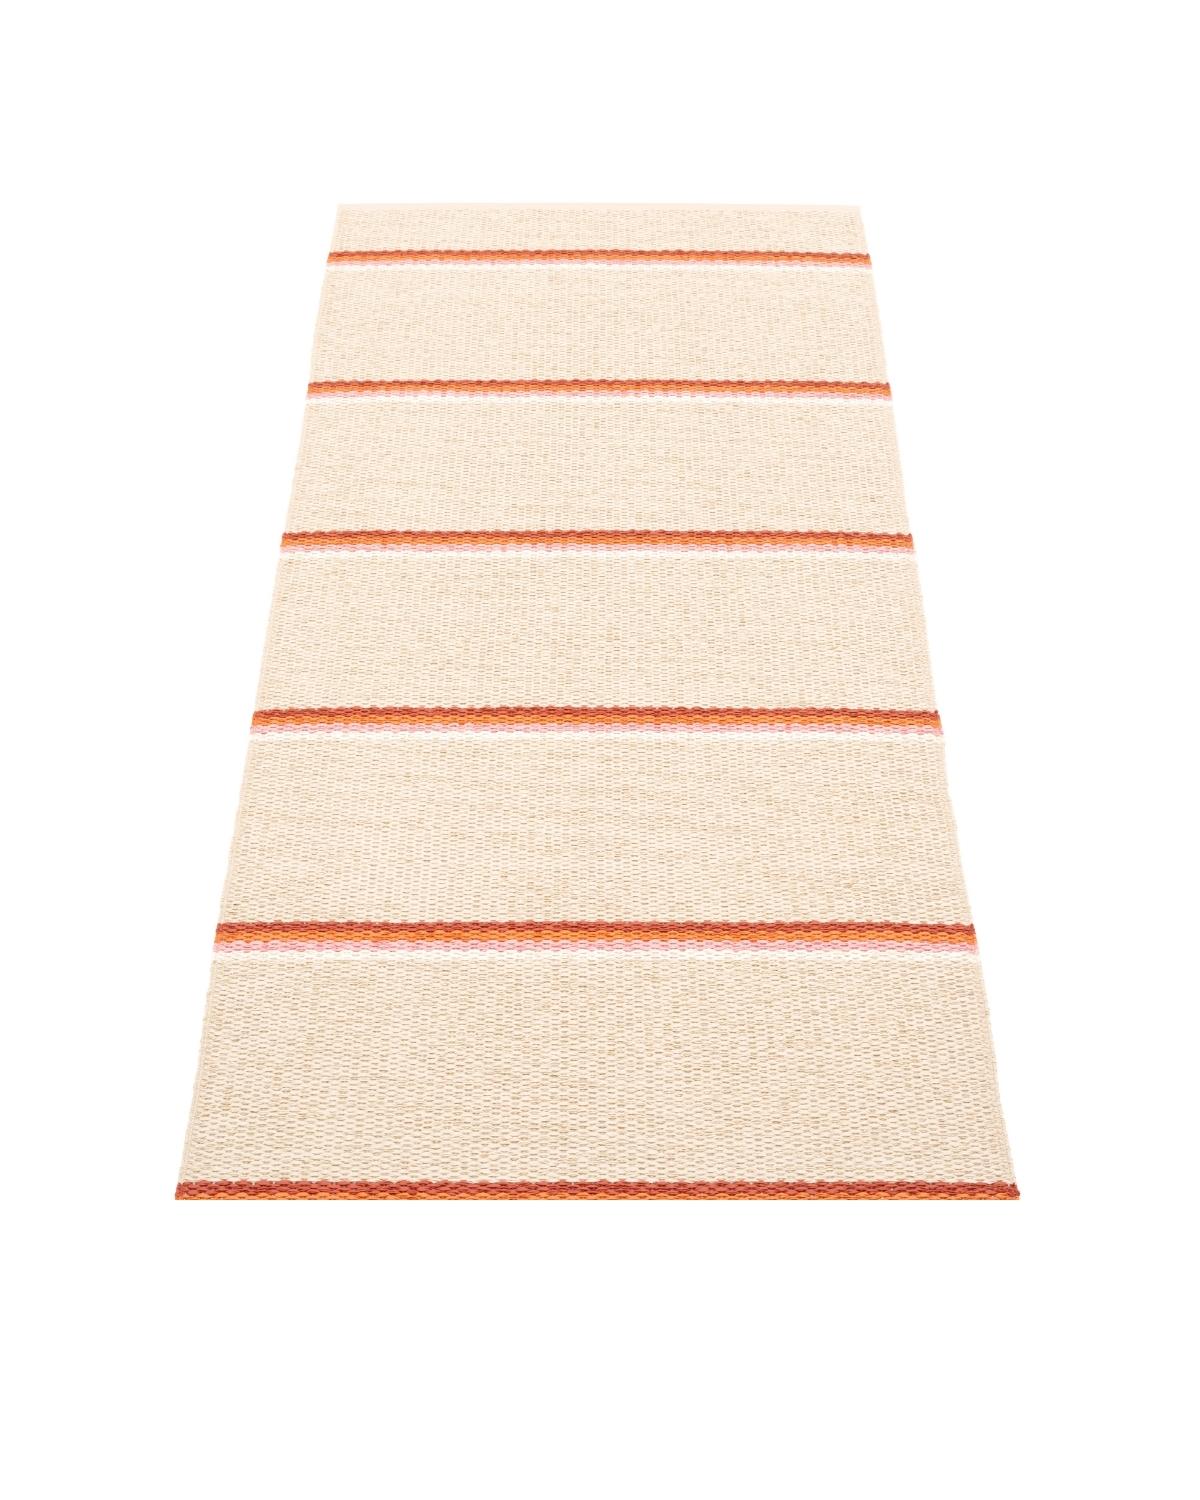 Pappelina Rug OLLE Brick  image 2